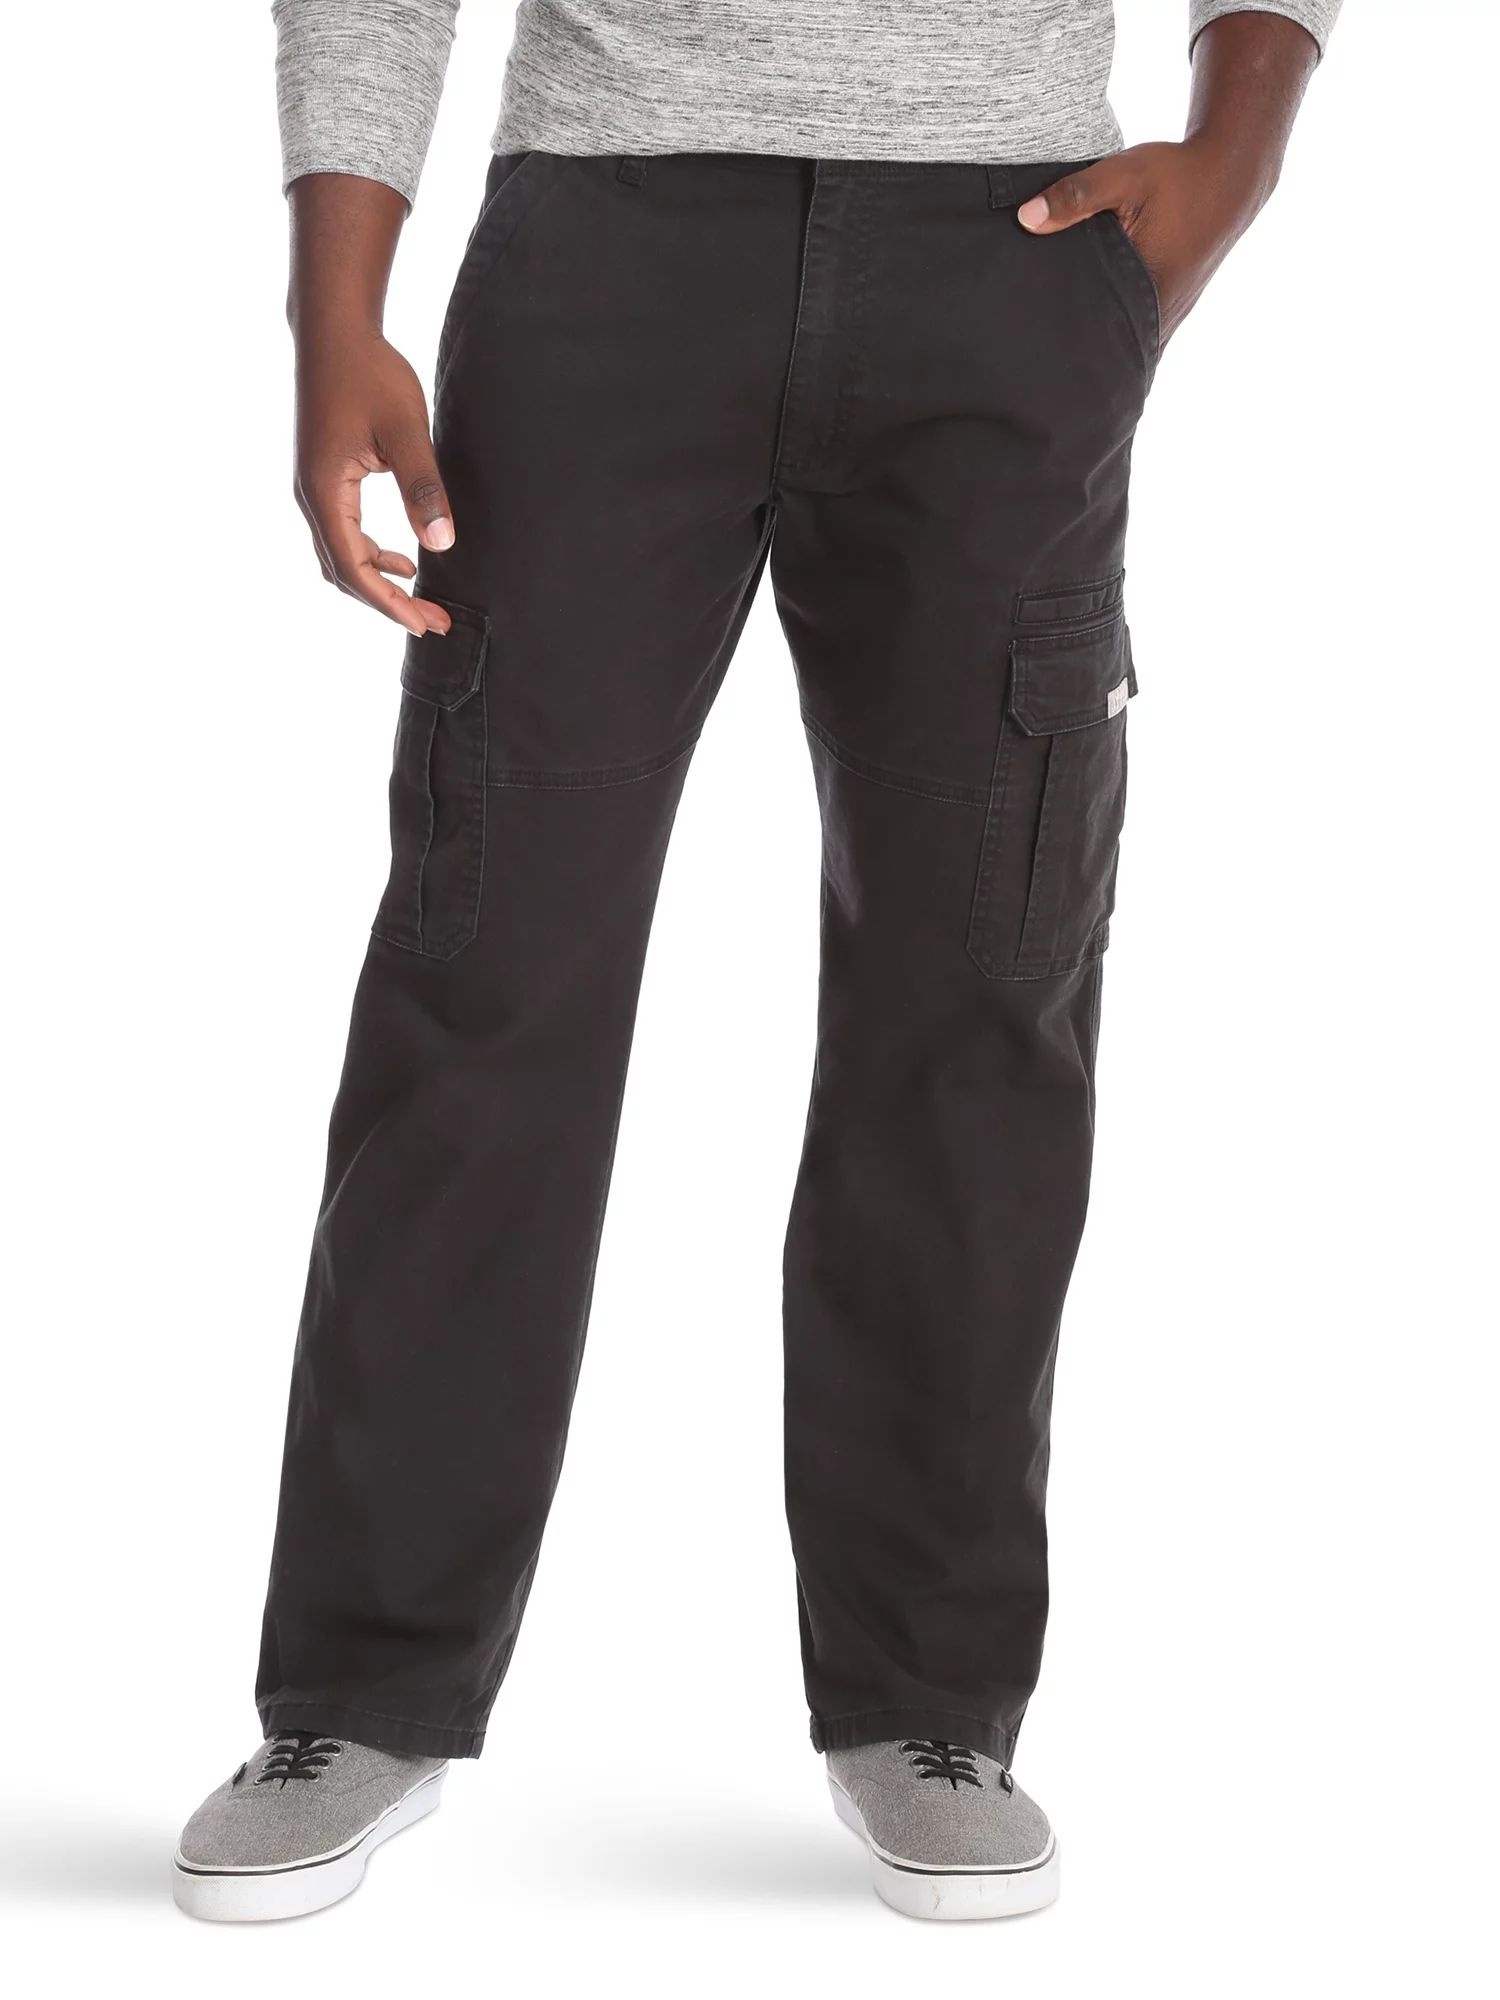 Wrangler Men's and Big Men's Relaxed Fit Cargo Pants With Stretch | Walmart (US)